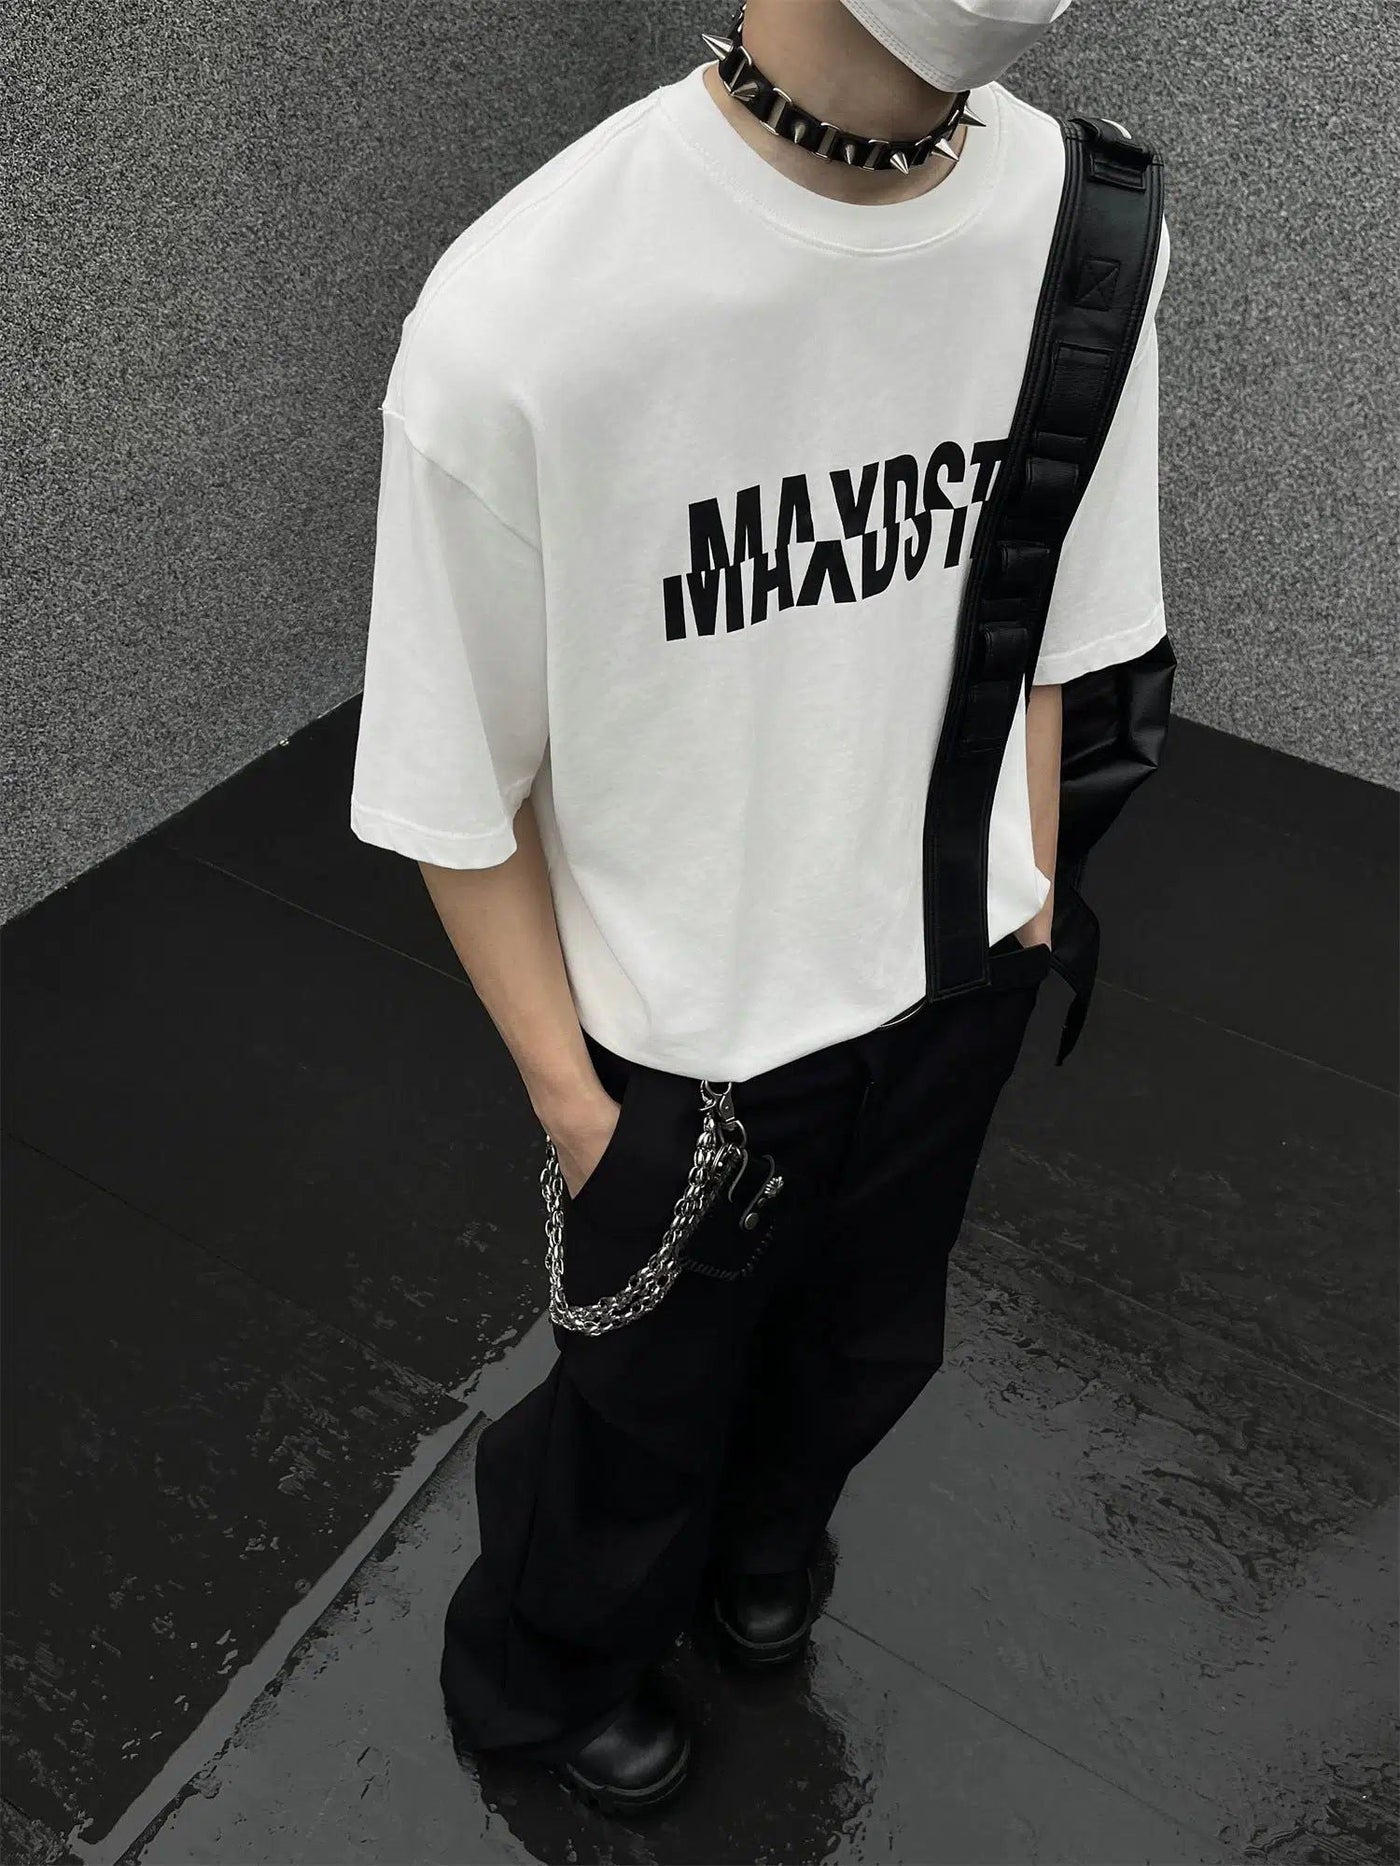 Classic Basic Letters T-Shirt Korean Street Fashion T-Shirt By MaxDstr Shop Online at OH Vault